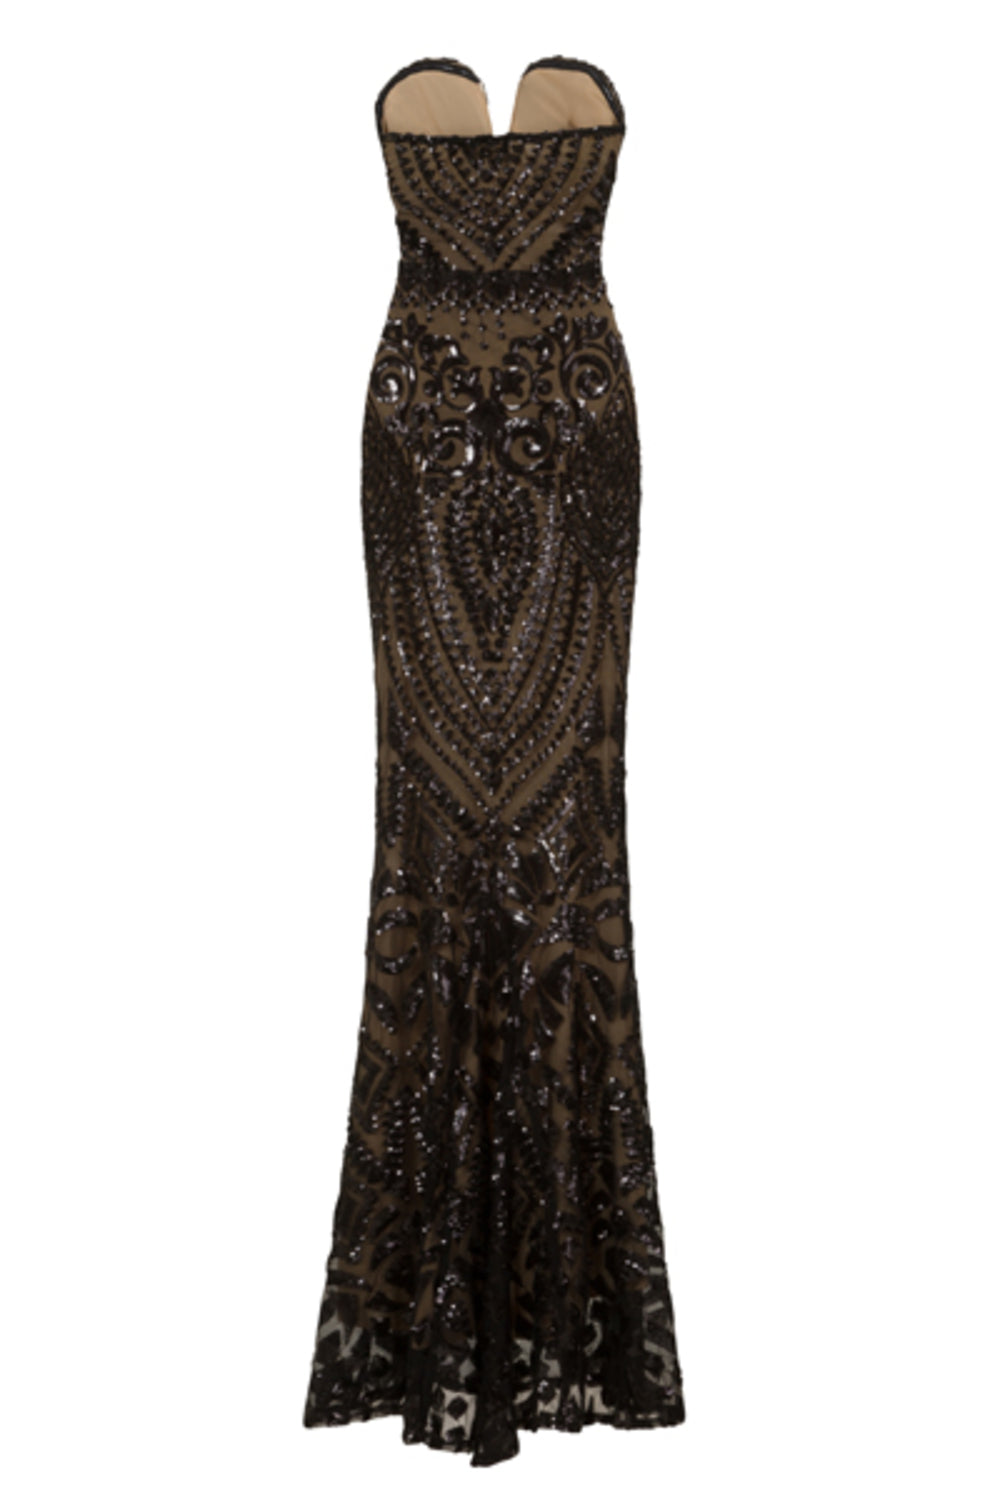 MAJESTY WOMEN'S MERMAID DRESS IN GOLD AFRICAN LACE WITH BLACK VELVET FABRIC  - Chimzi